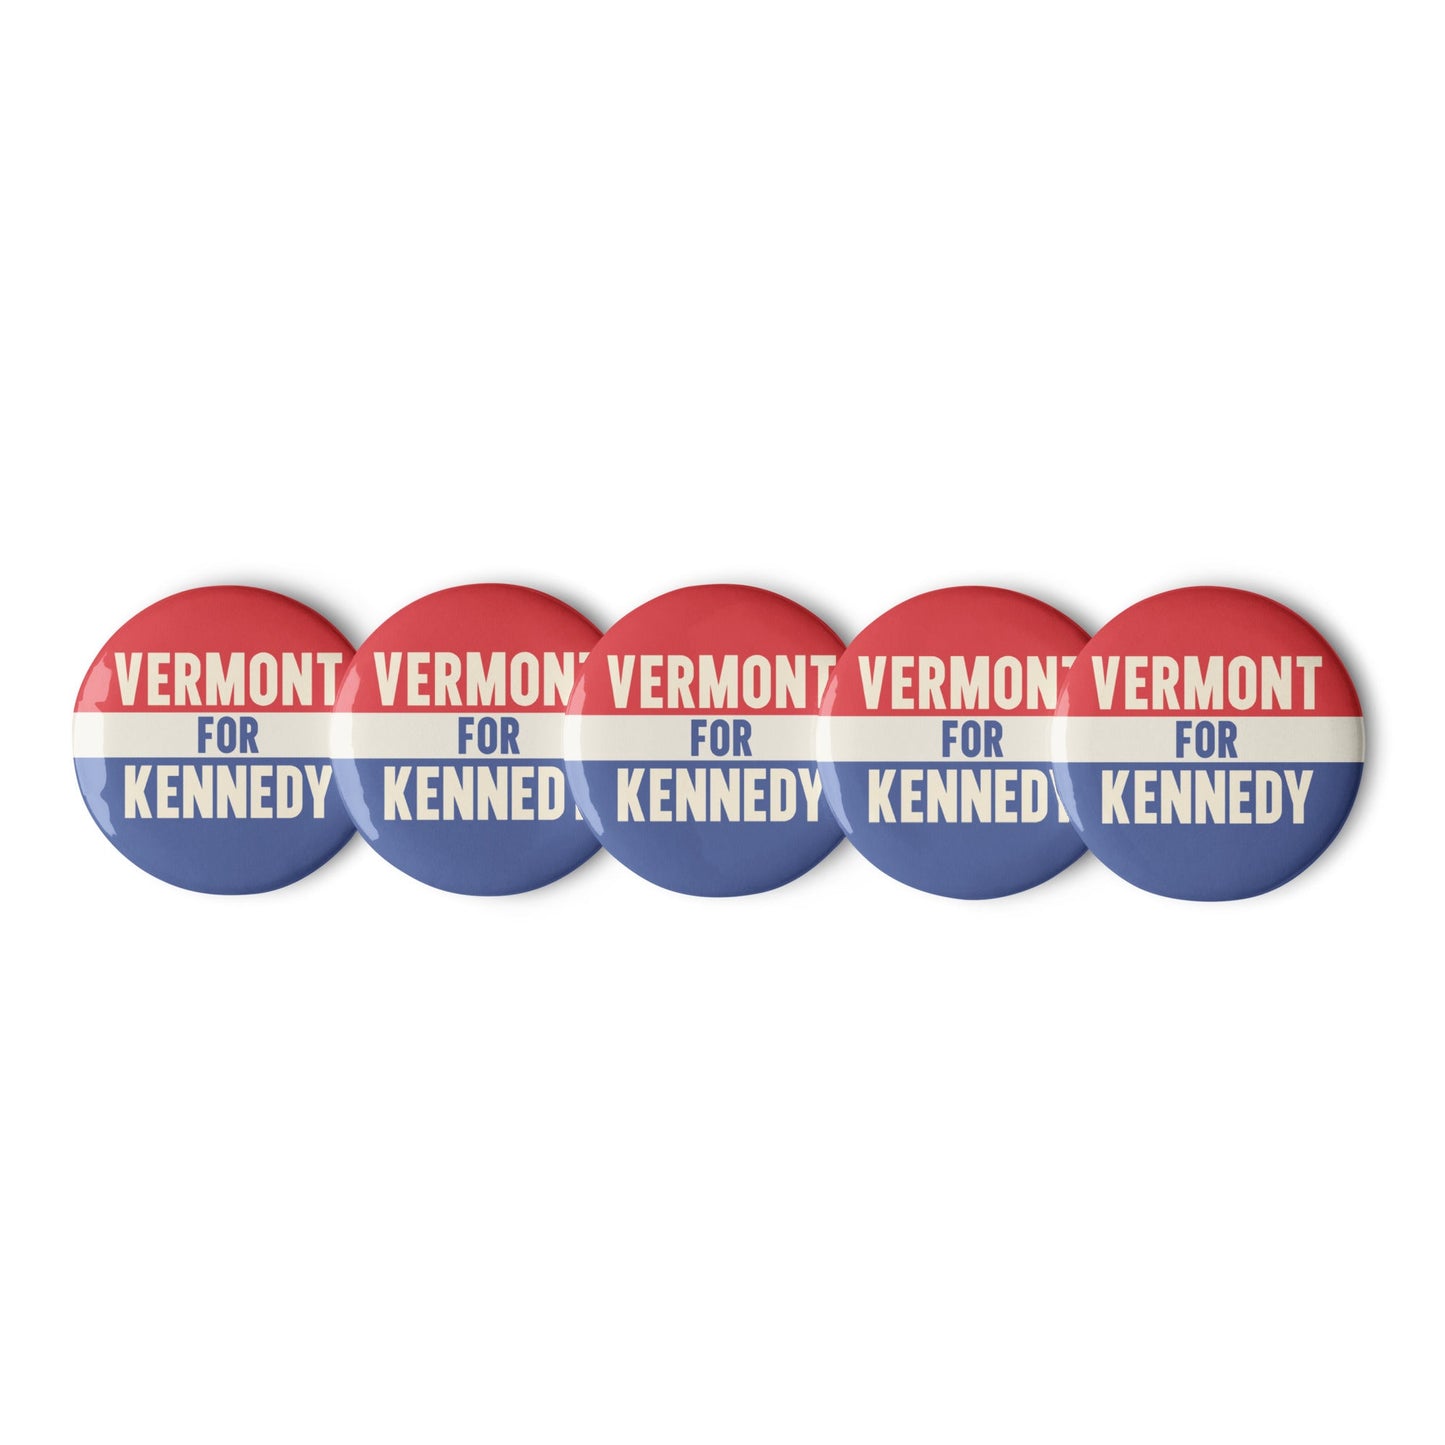 Vermont for Kennedy (5 Buttons) - TEAM KENNEDY. All rights reserved